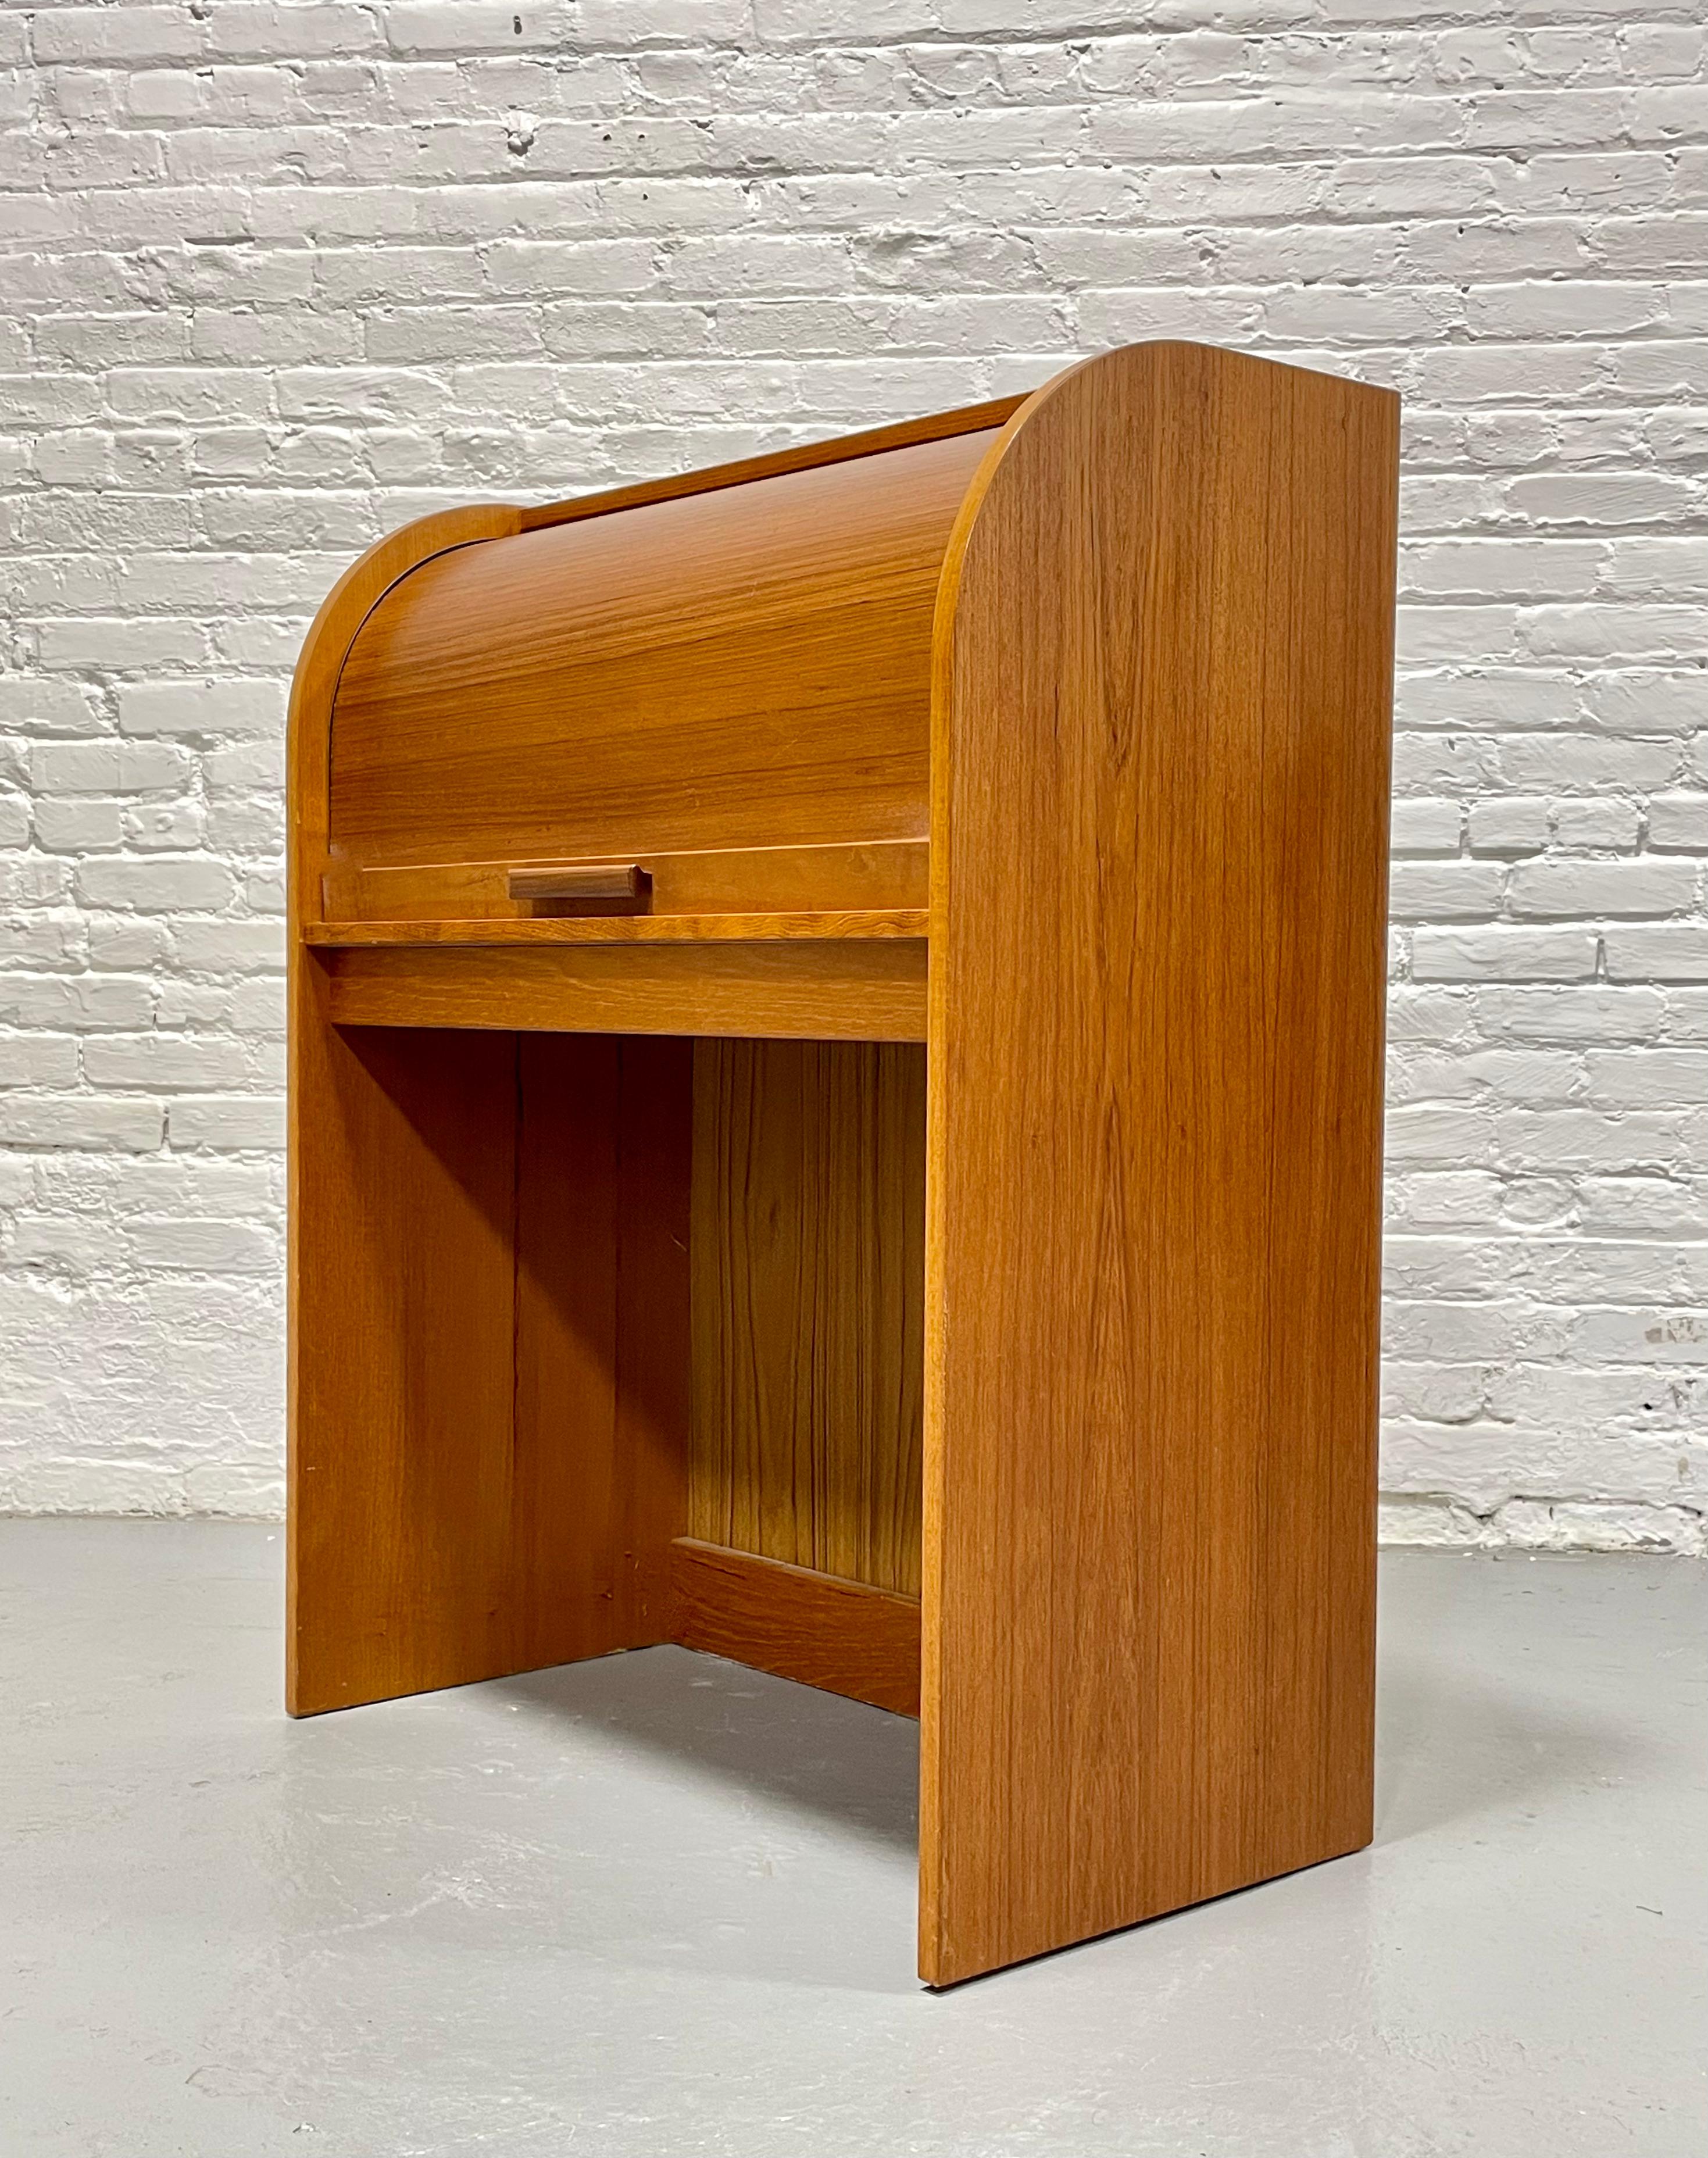 Danish Mid Century Modern Teak Tambour Secretary Desk, c. 1960's. Incredible profile with hidden pull out tabletop and open area below for your chair. Pull up a chair and do some work on your laptop with this creative space-saving mini office and